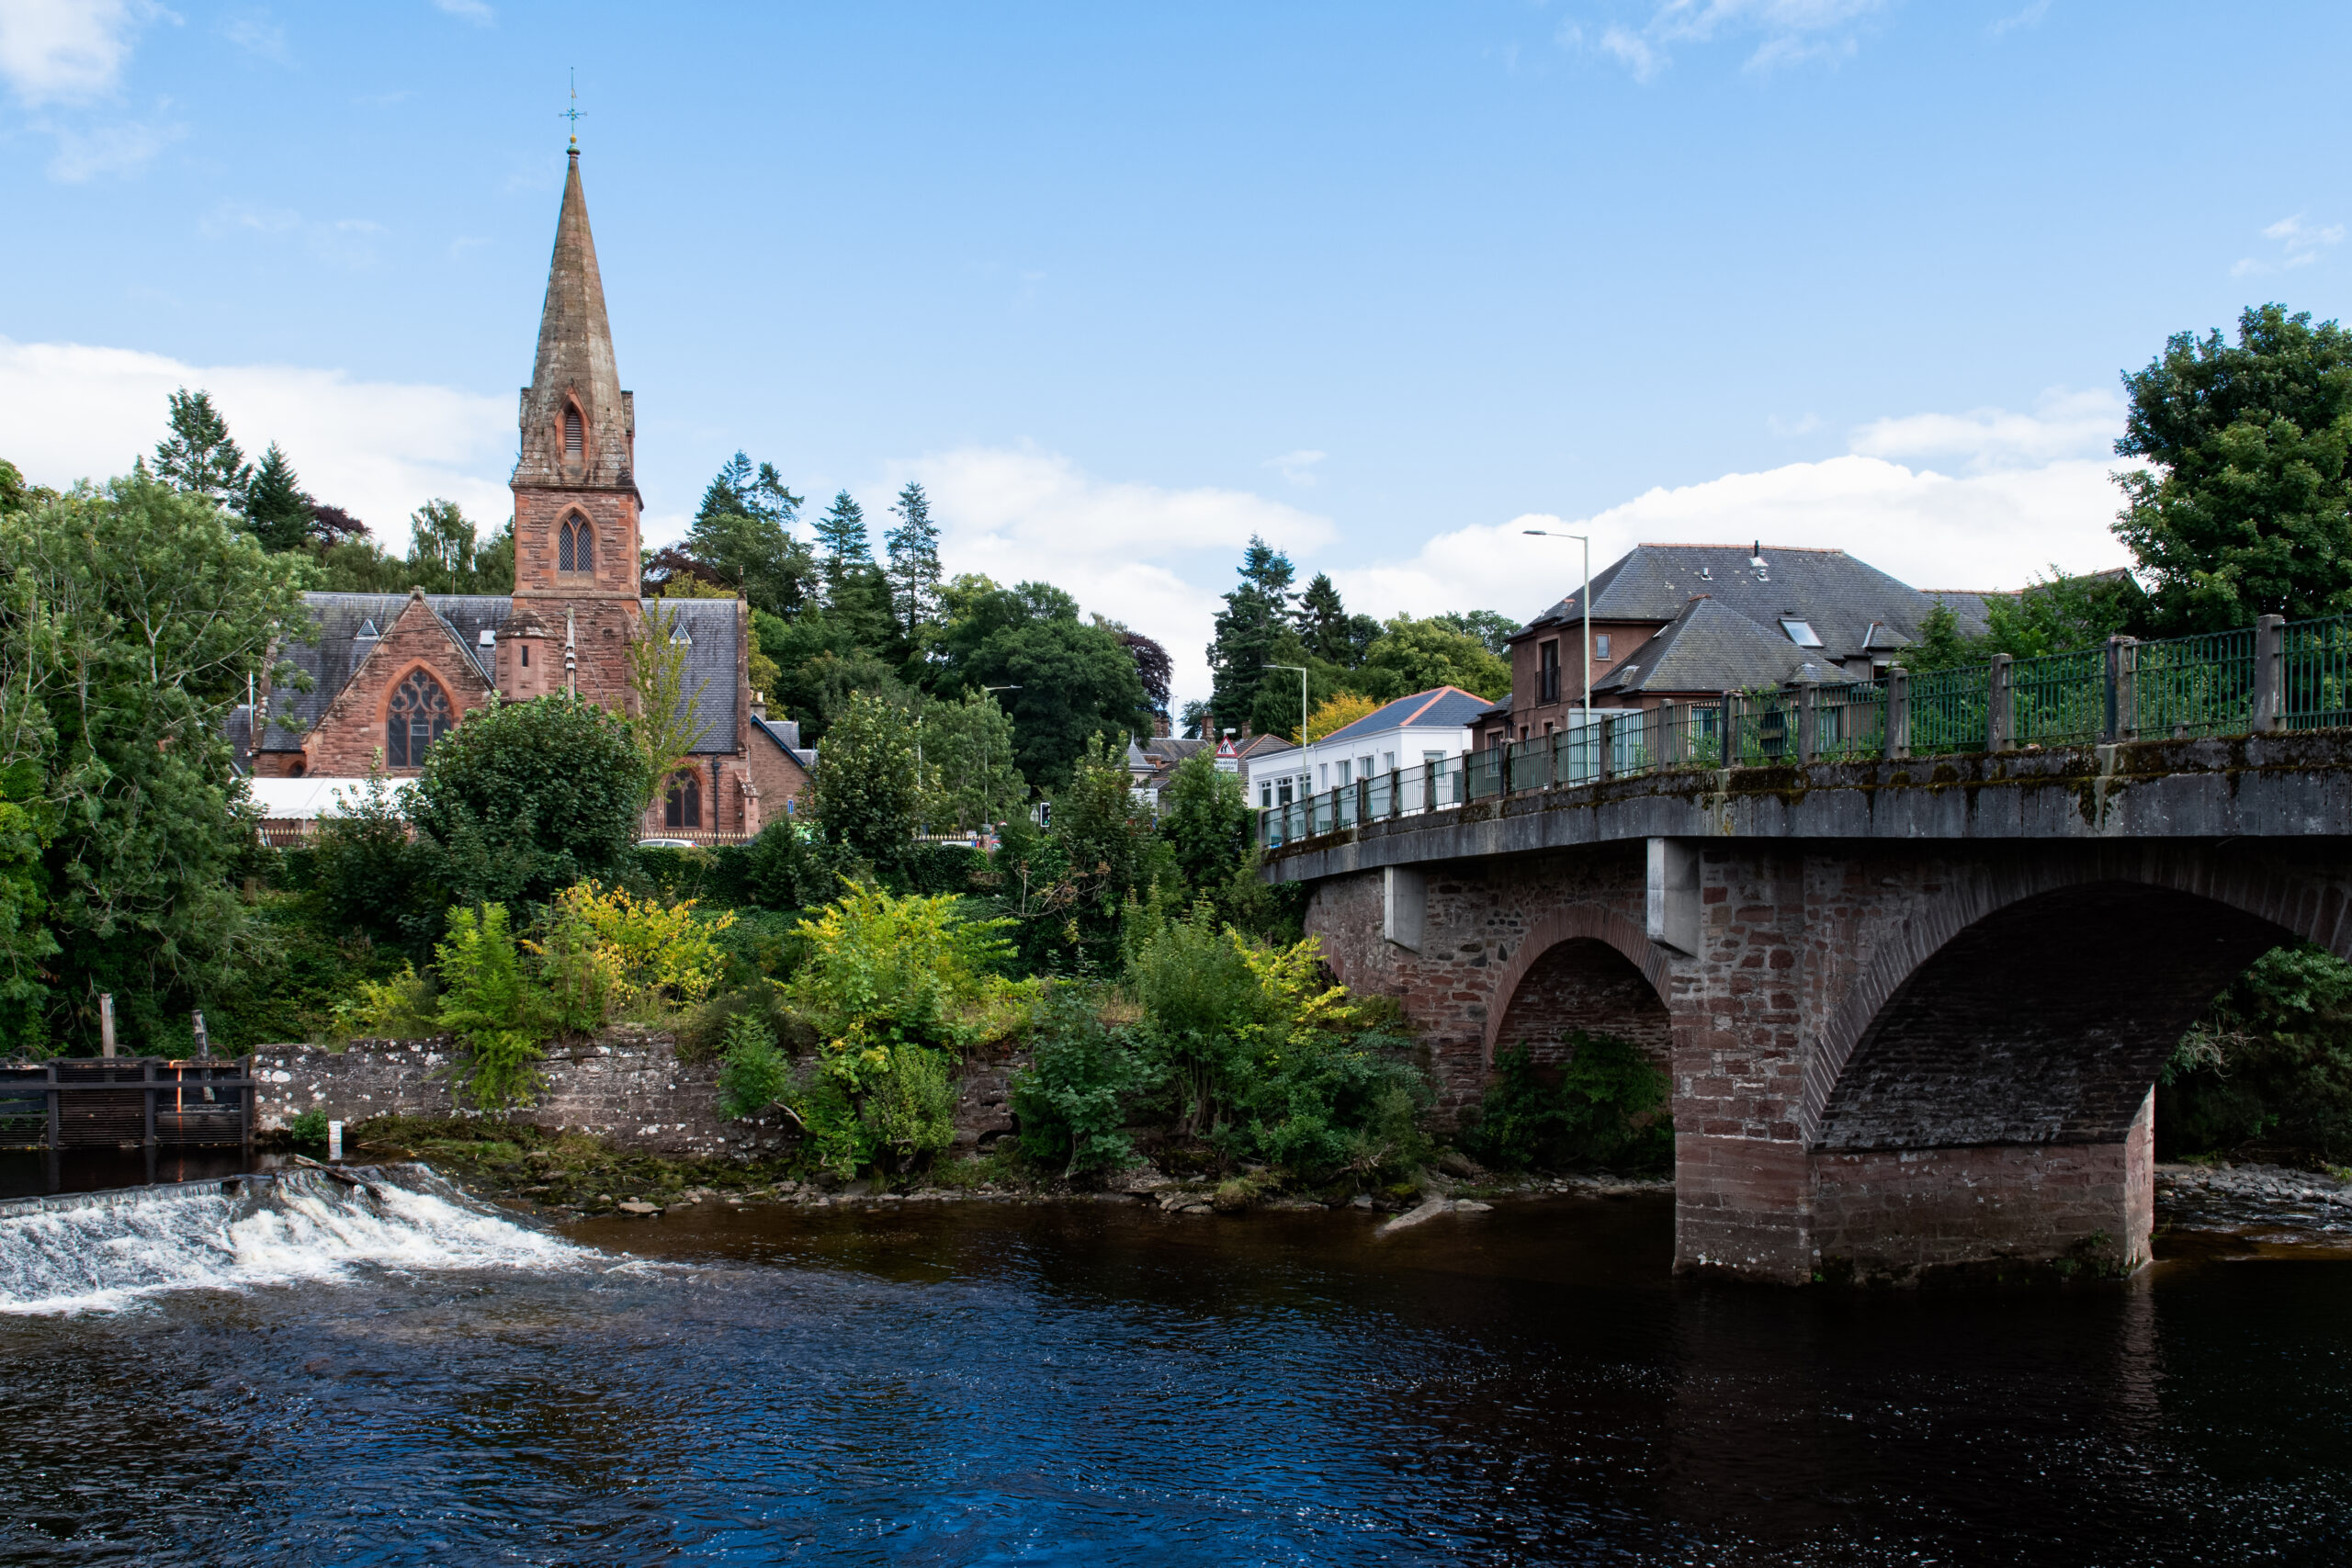 Scene at the river in Blairgowrie in Scotland. Blairgowrie Bridge, the Riverside Methodist Church and River Ericht